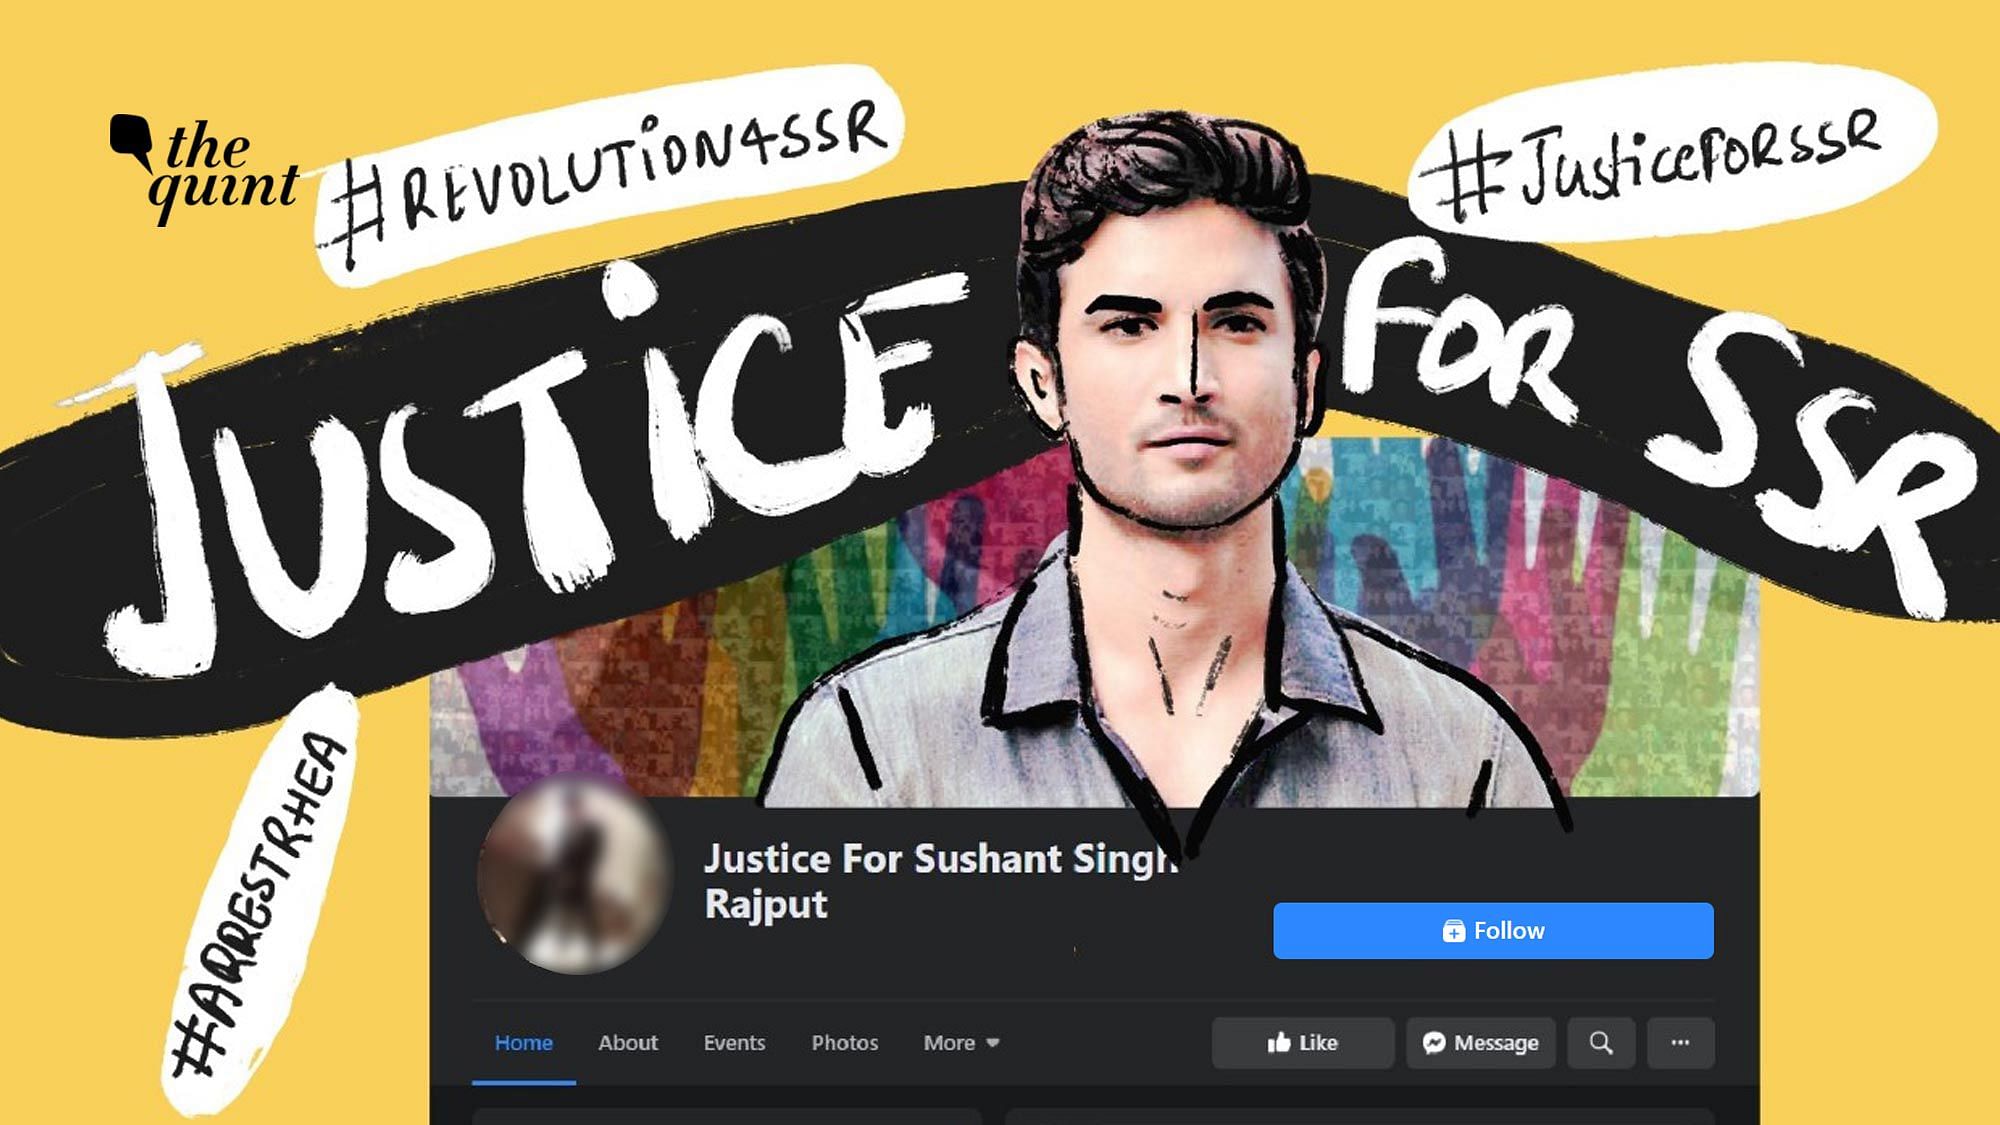 Sushant Singh Rajput’s fans have kept him in the news cycle by rallying for him on Facebook groups and pages.